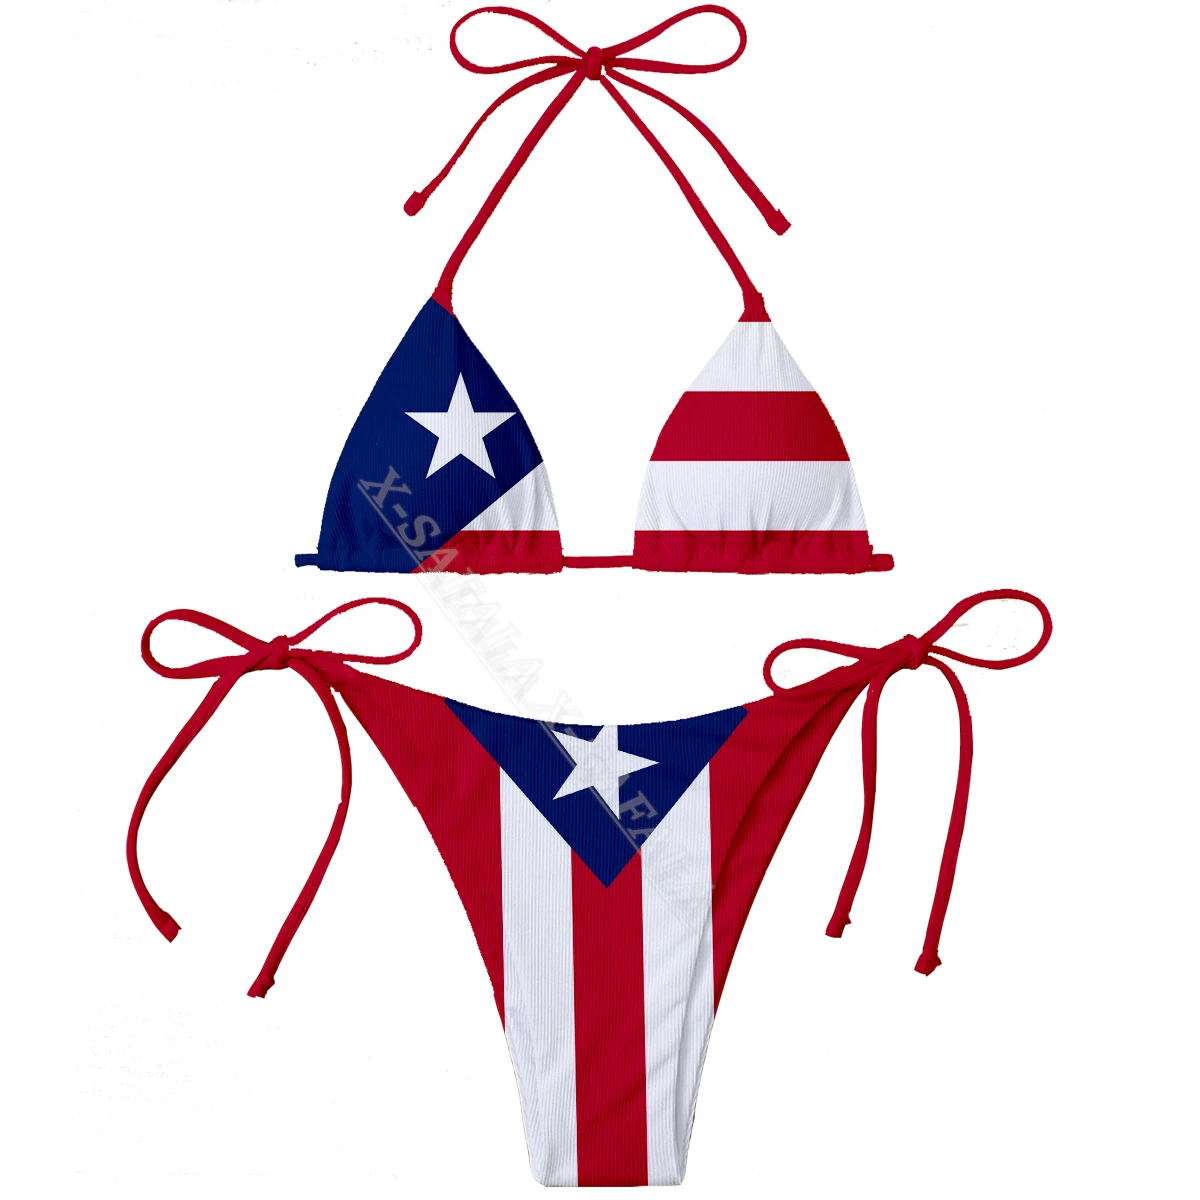 brendan bloomfield recommends puerto rican bathing suit pic